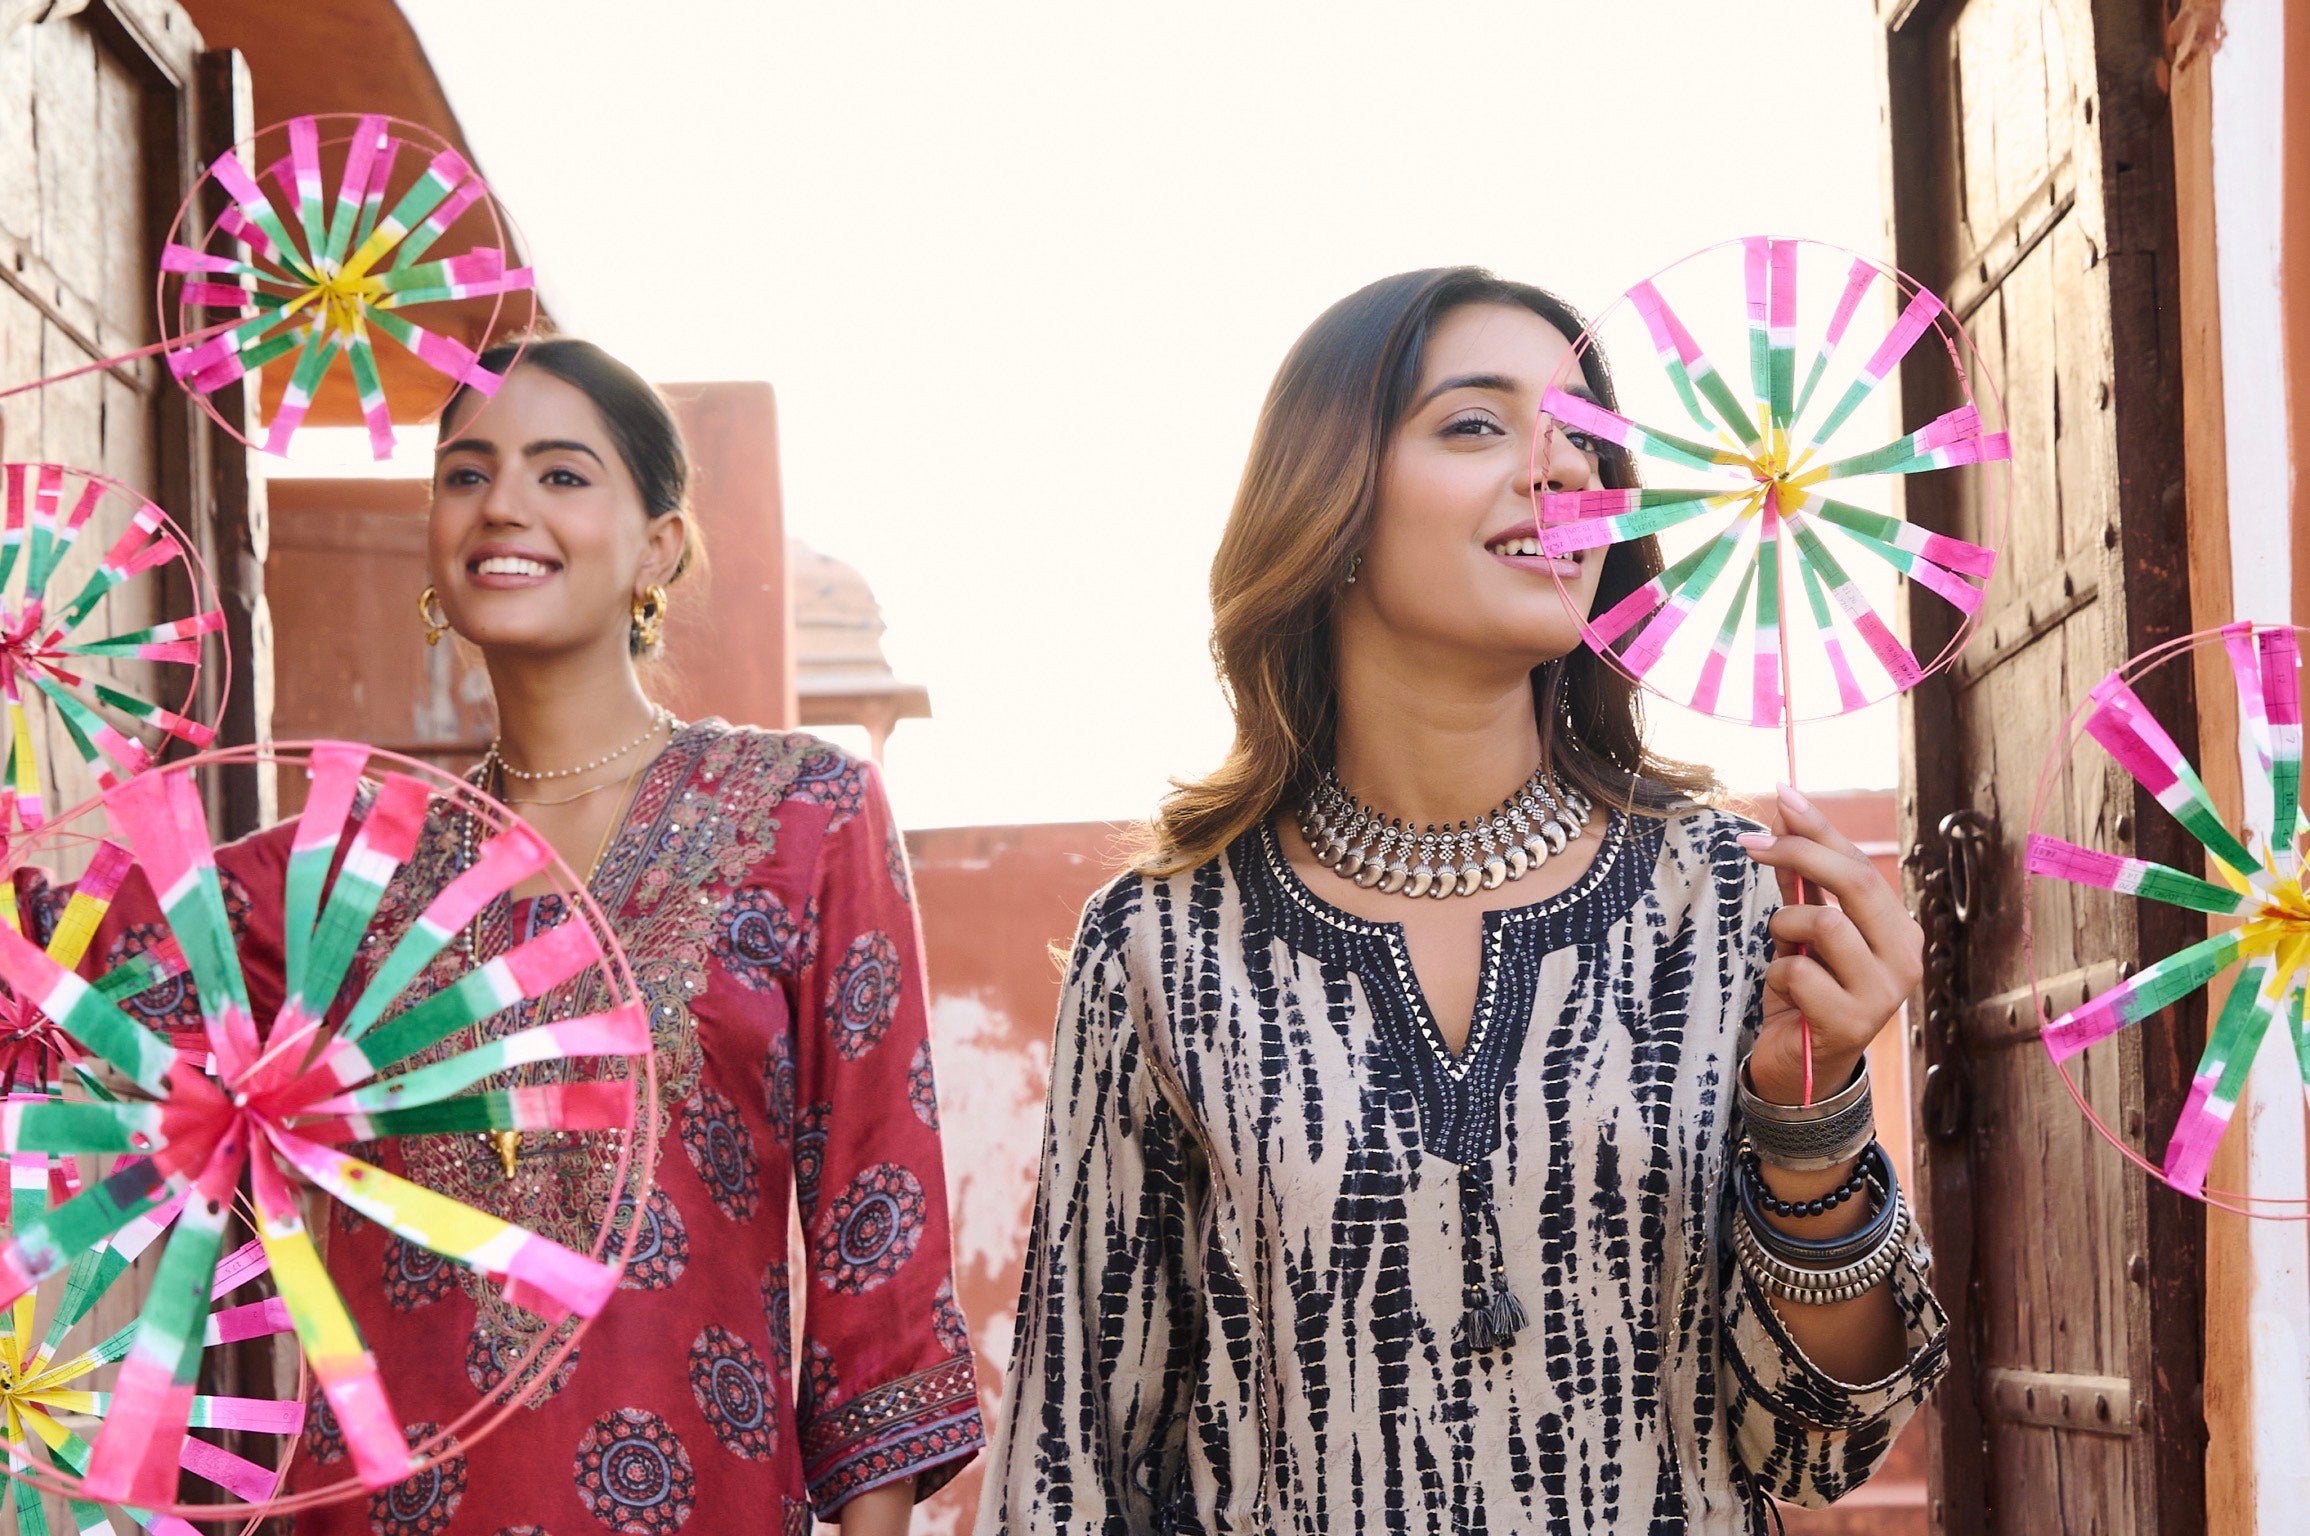 STYLISH RAKHI OUTFITS FOR SISTERS: DRESSING UP FOR THE FESTIVE OCCASION WITH LAKSHITA